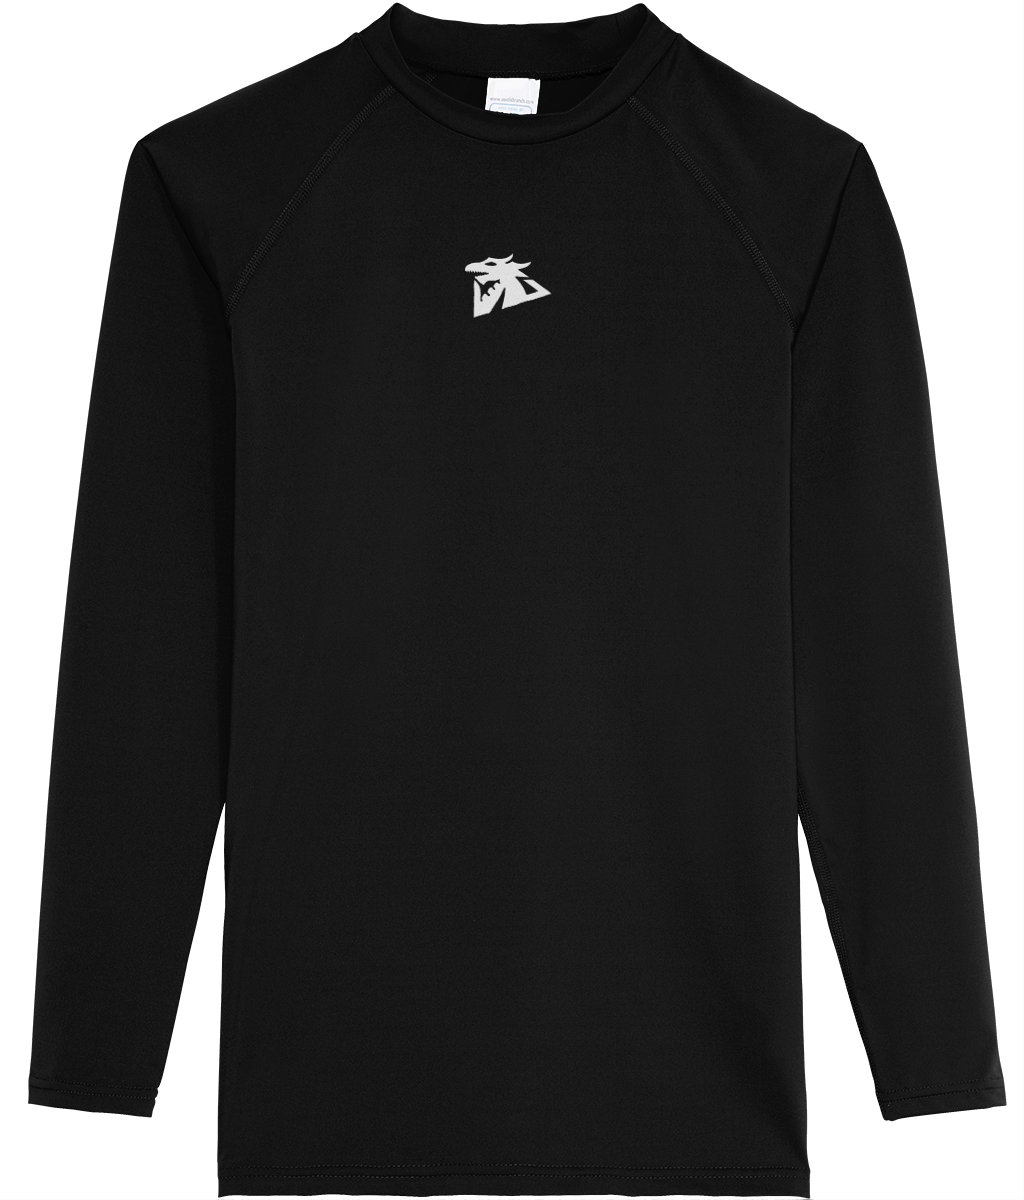 PERSEVERE AND CONQUER MKII LONG SLEEVE PERFORMANCE TOP